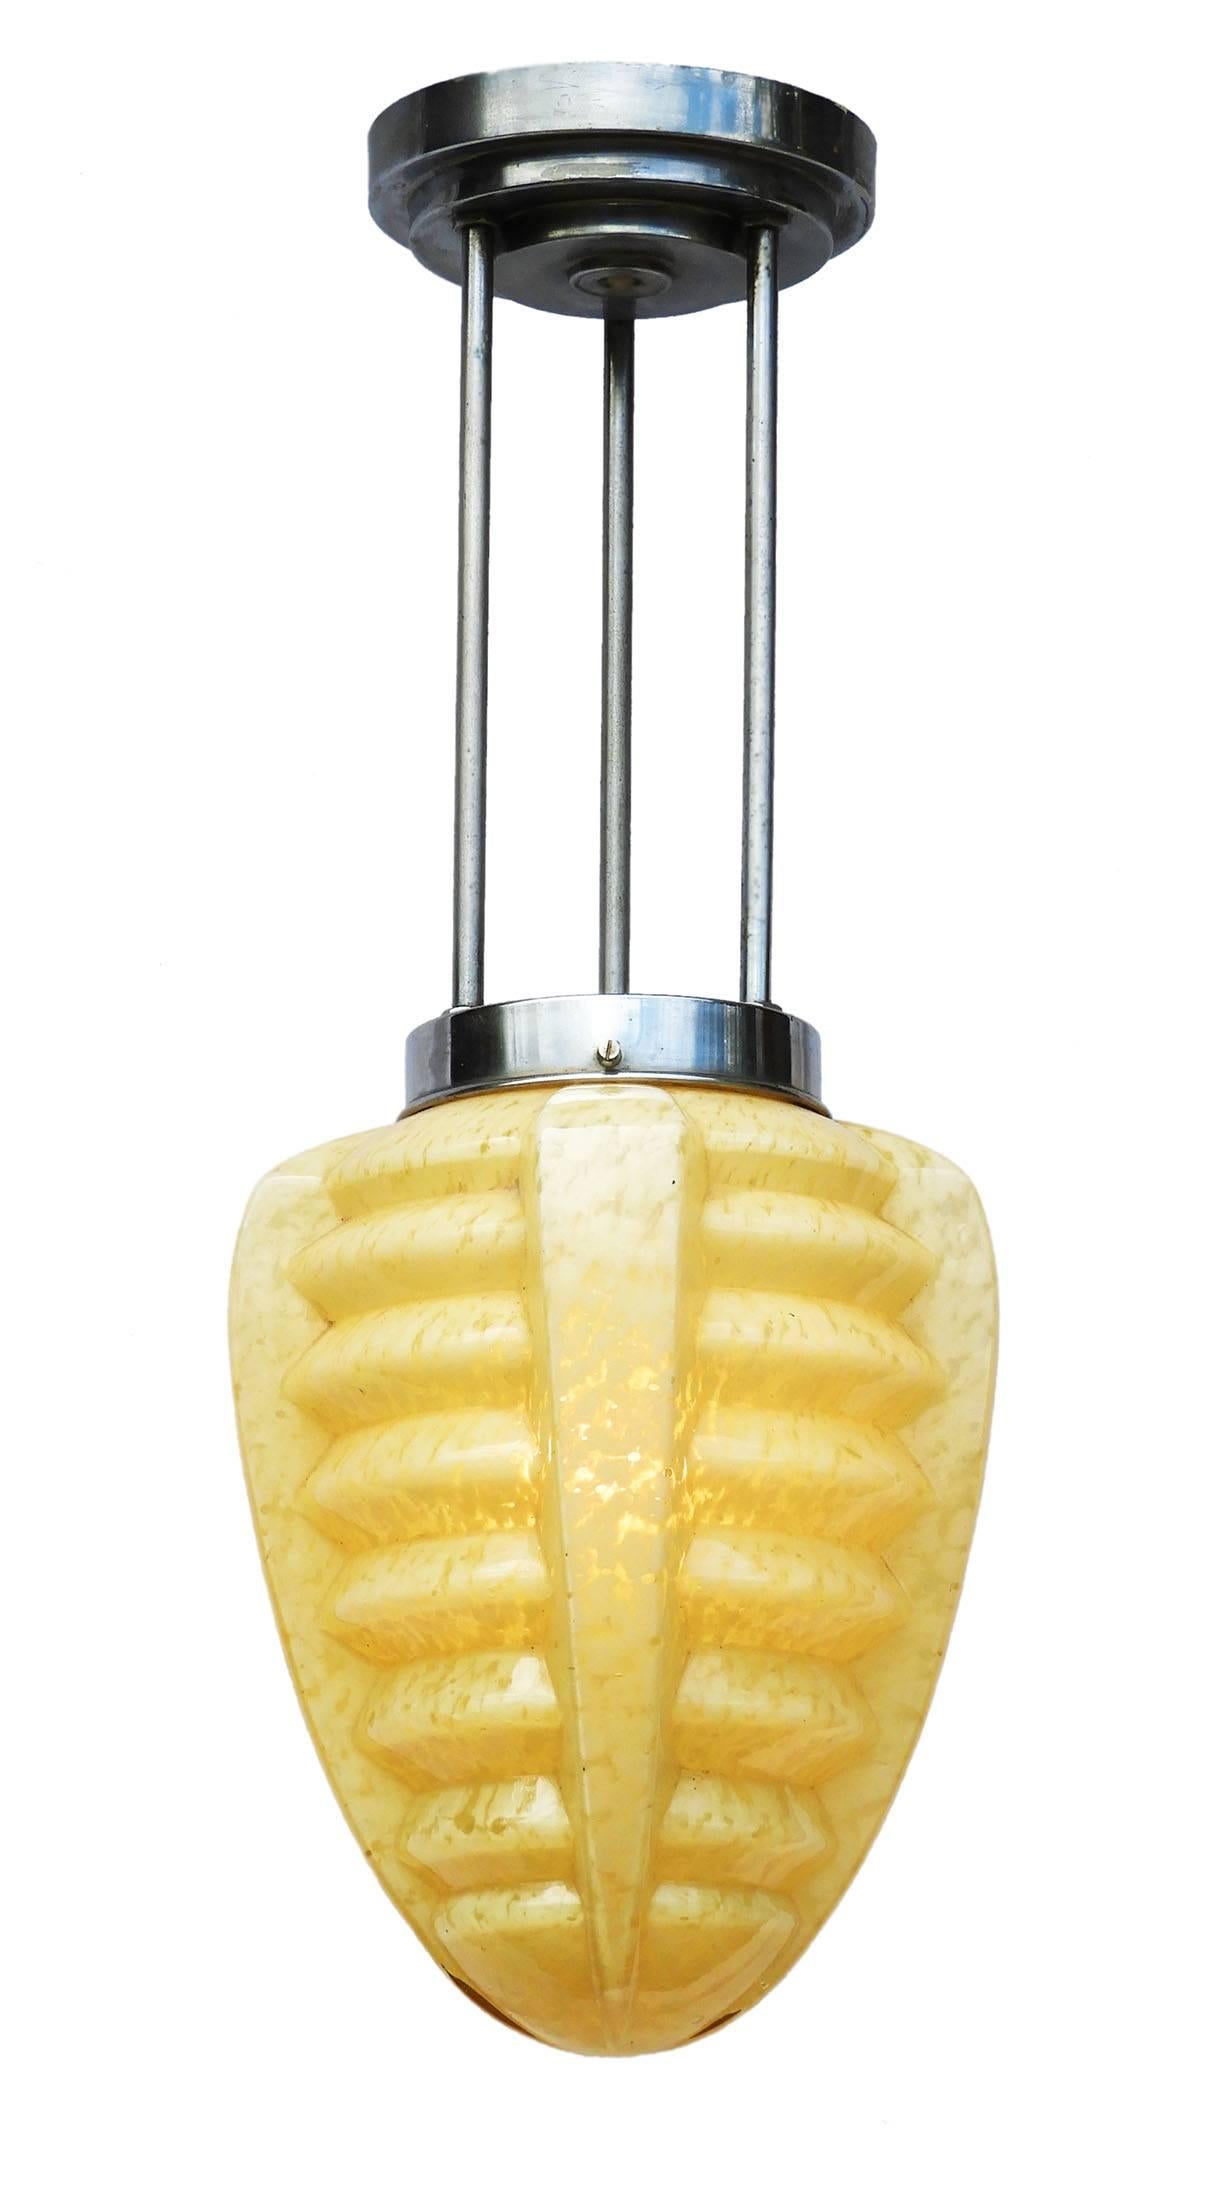 Stunning Art Deco ceiling light, mottled buttermilk yellow glass shade on a chrome three stemmed fixed pendant fitting. 
In good original condition with no losses to glass.
This will be re-wired and tested to USA or UK and European standards